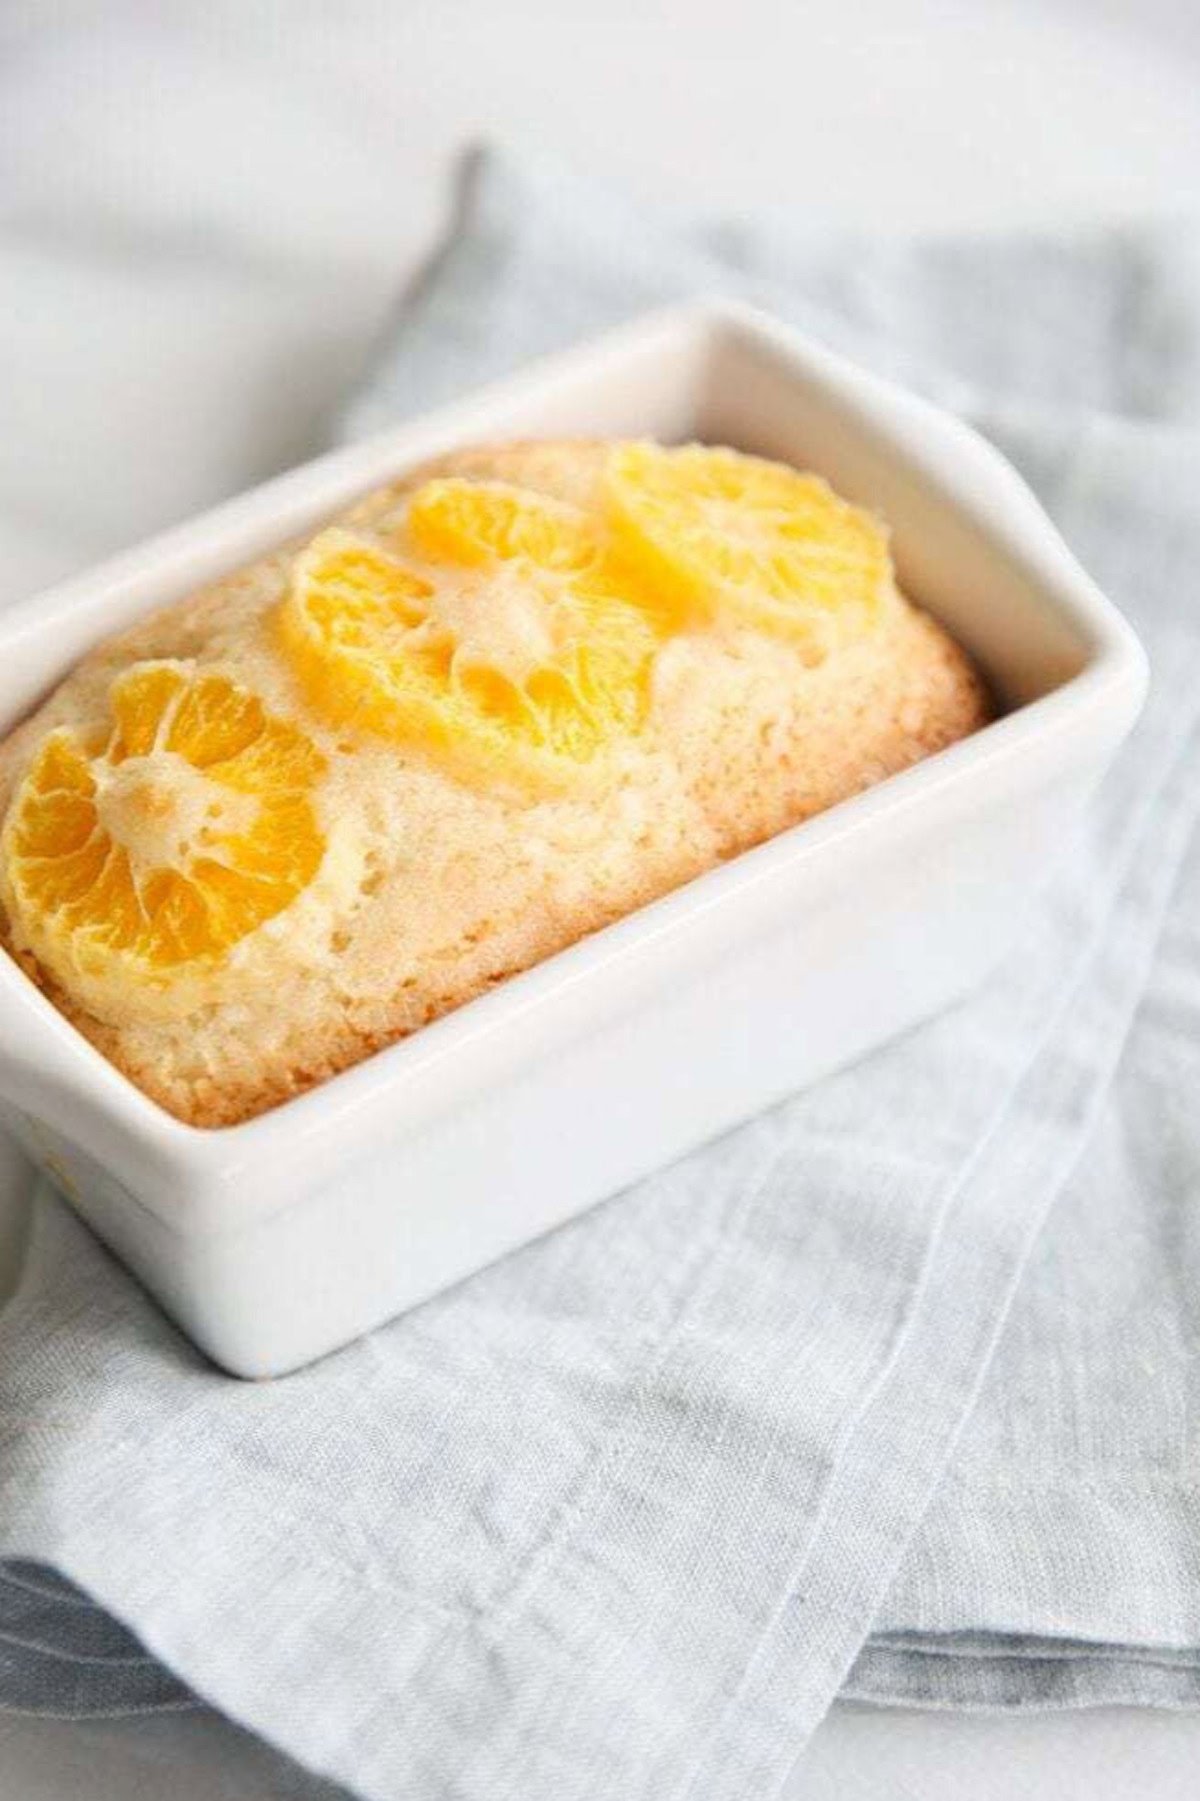 A rectangular loaf of quick orange bread topped with lemon slices in a white baking dish on a light gray cloth.